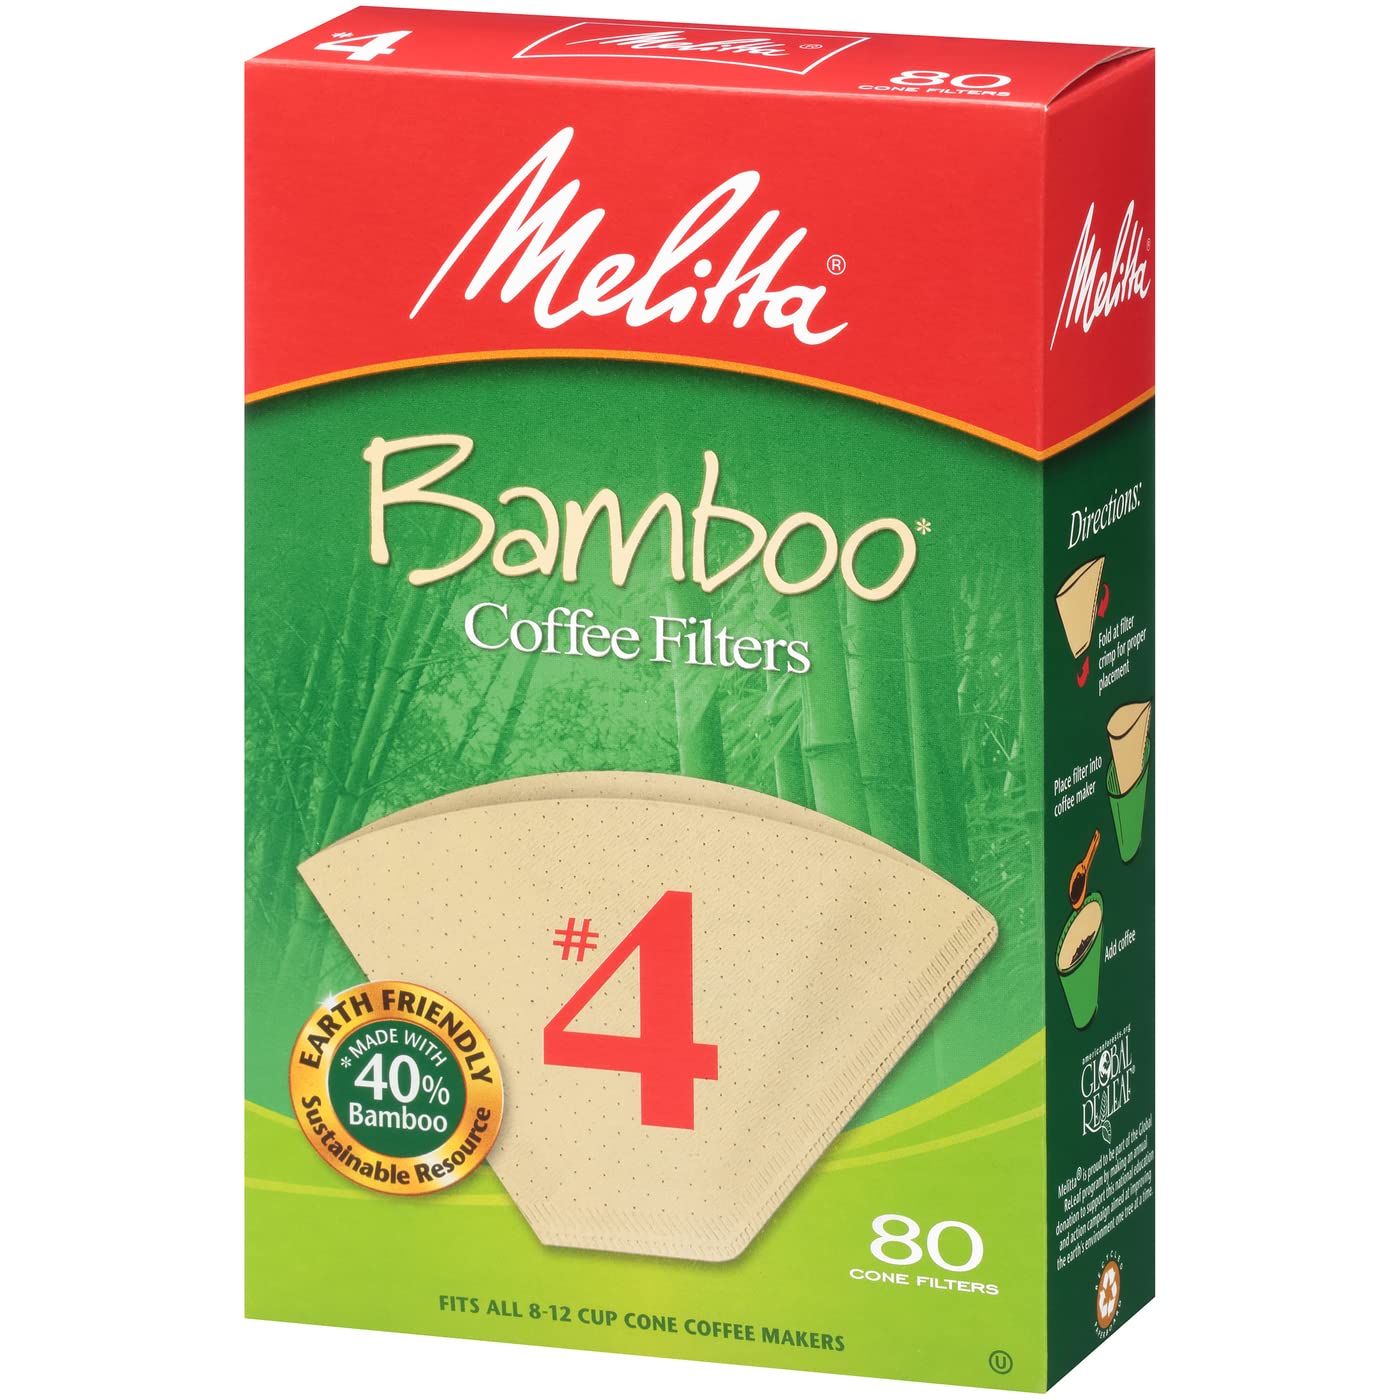 Melitta 4 Cone Coffee Filters, Bamboo, 80 Count (Pack of 6) 480 Total Filters Count - Packaging May Vary